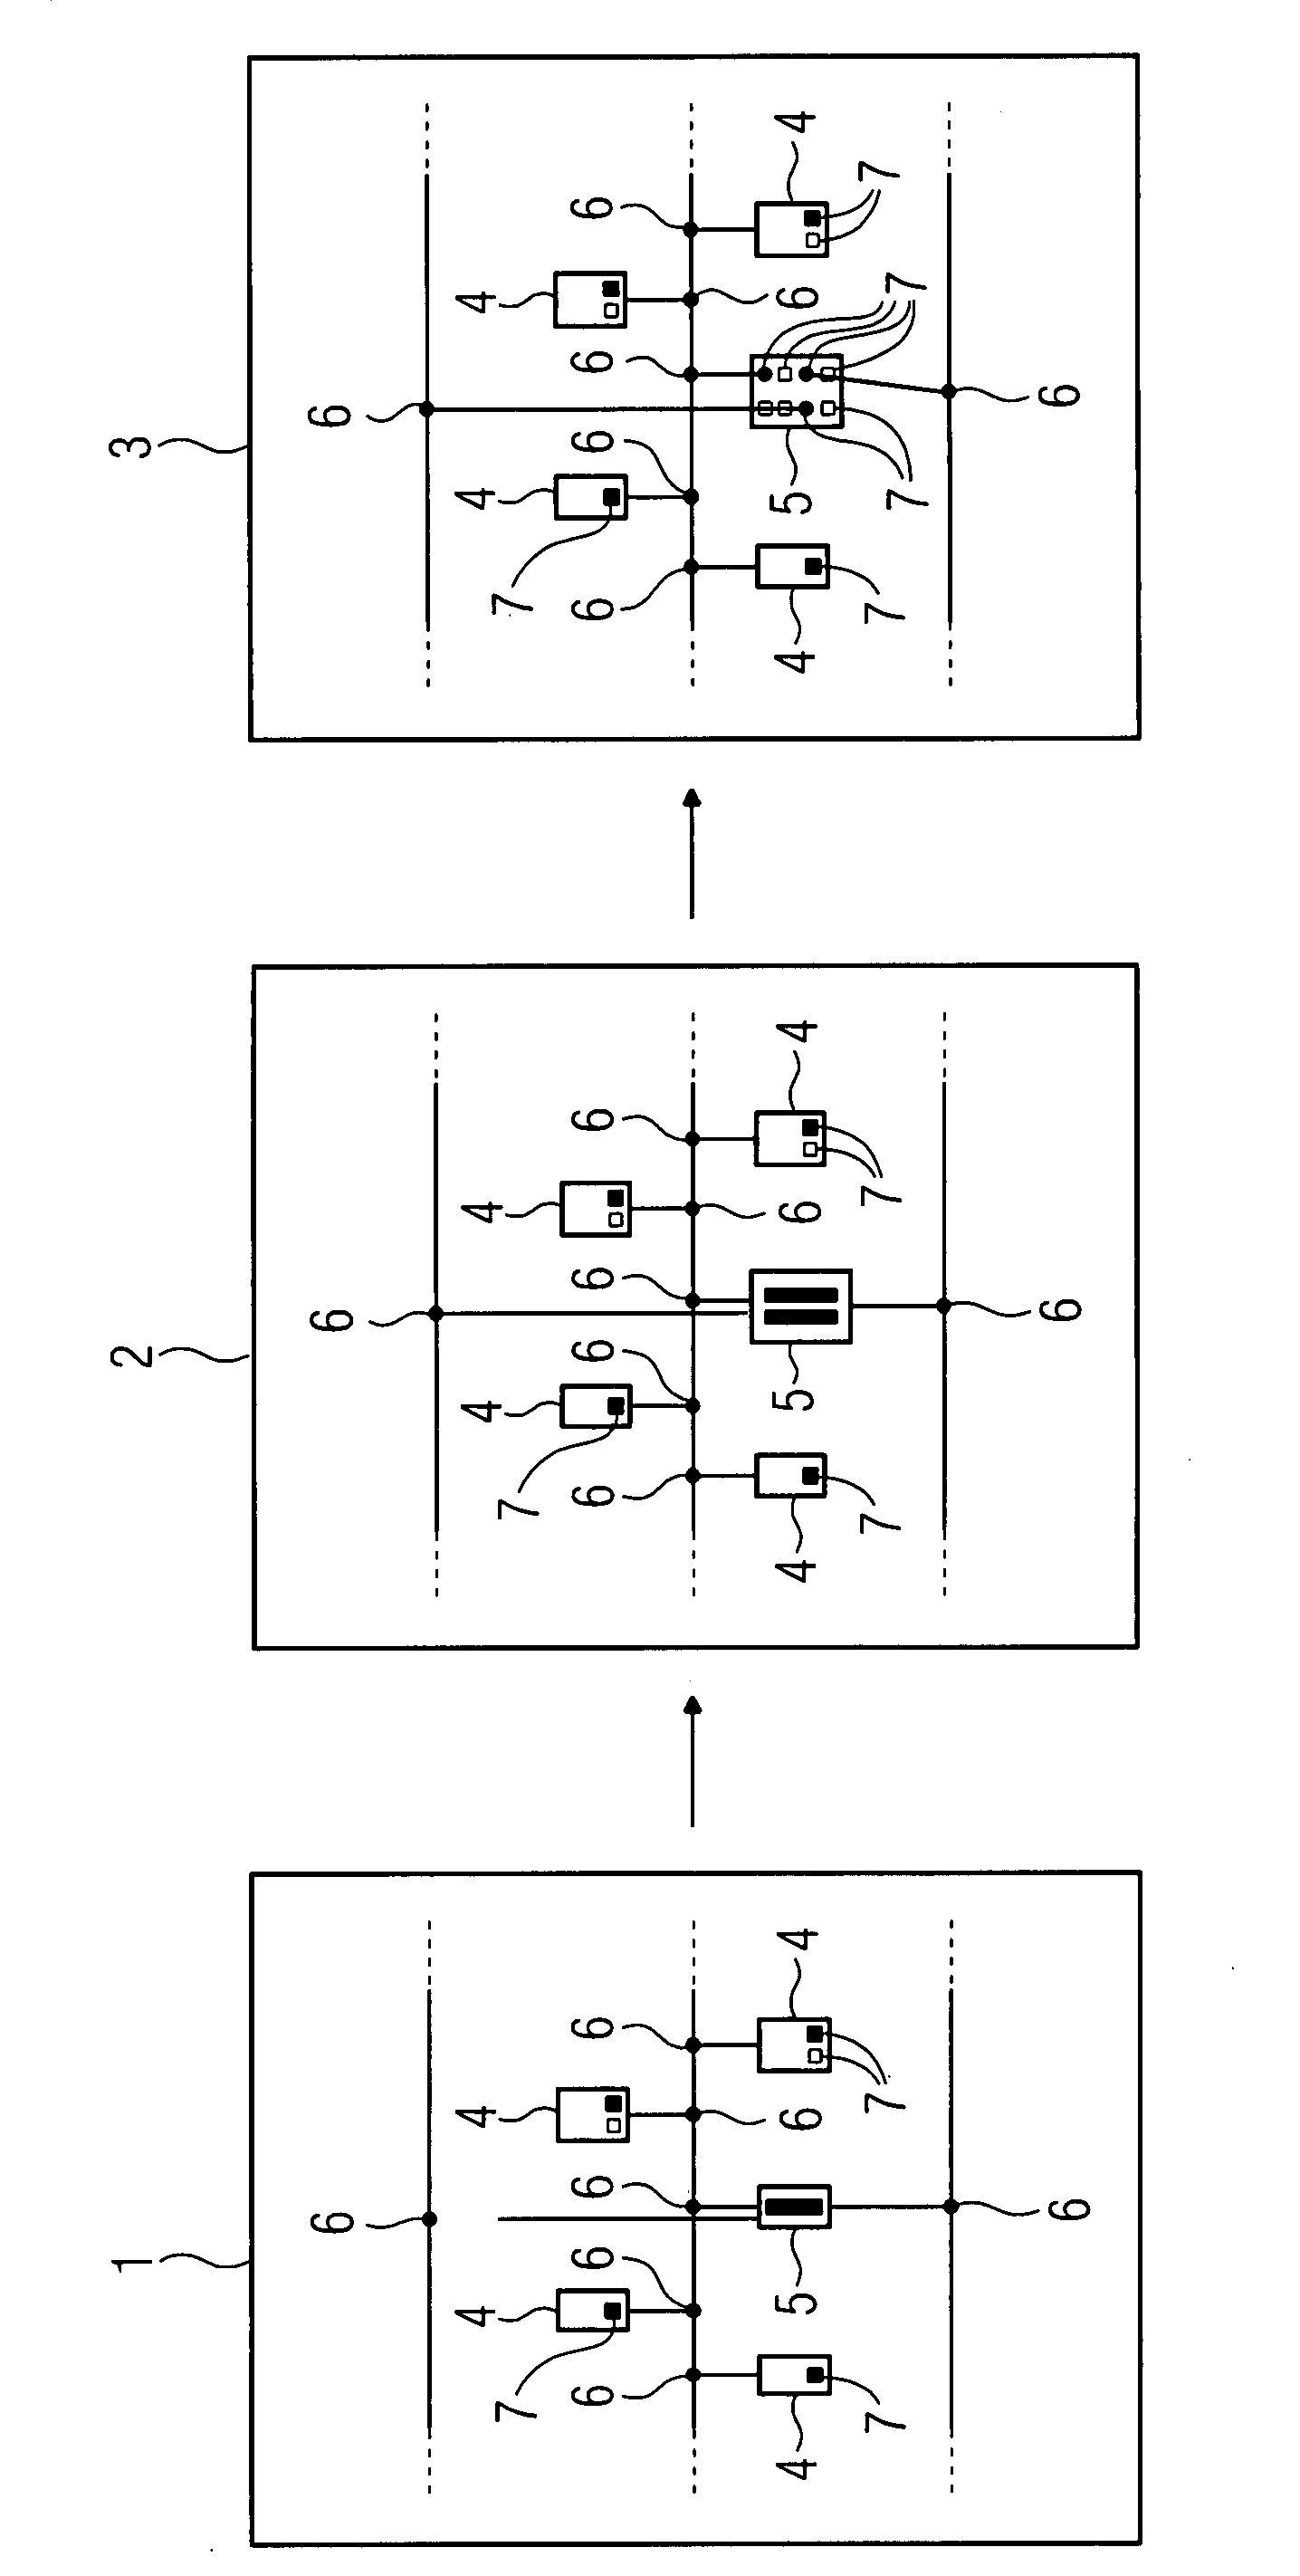 Selective detailed display of devices in a network